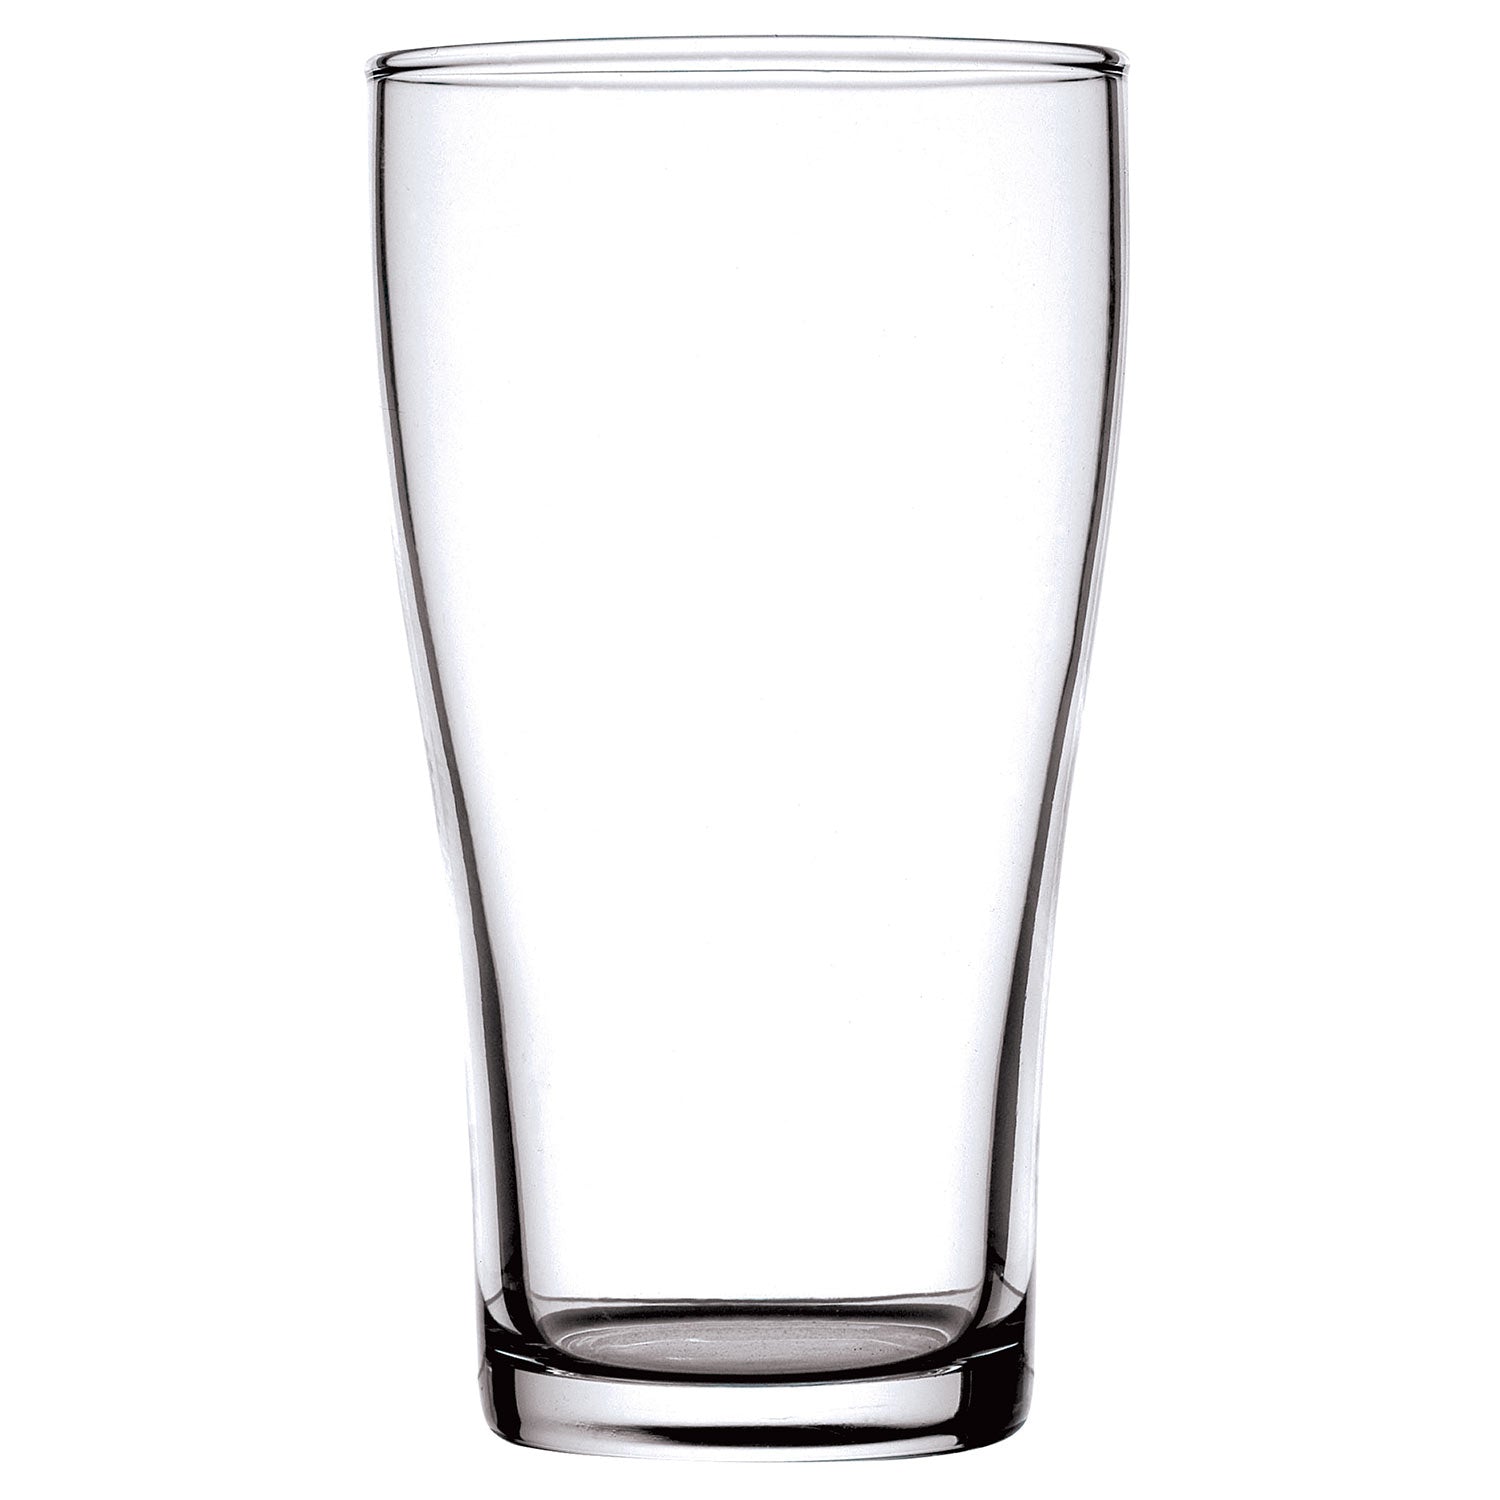 ARC Conical Beer Glass 425ml - CT/48 Bar & Dining Nucleated Carton of 48